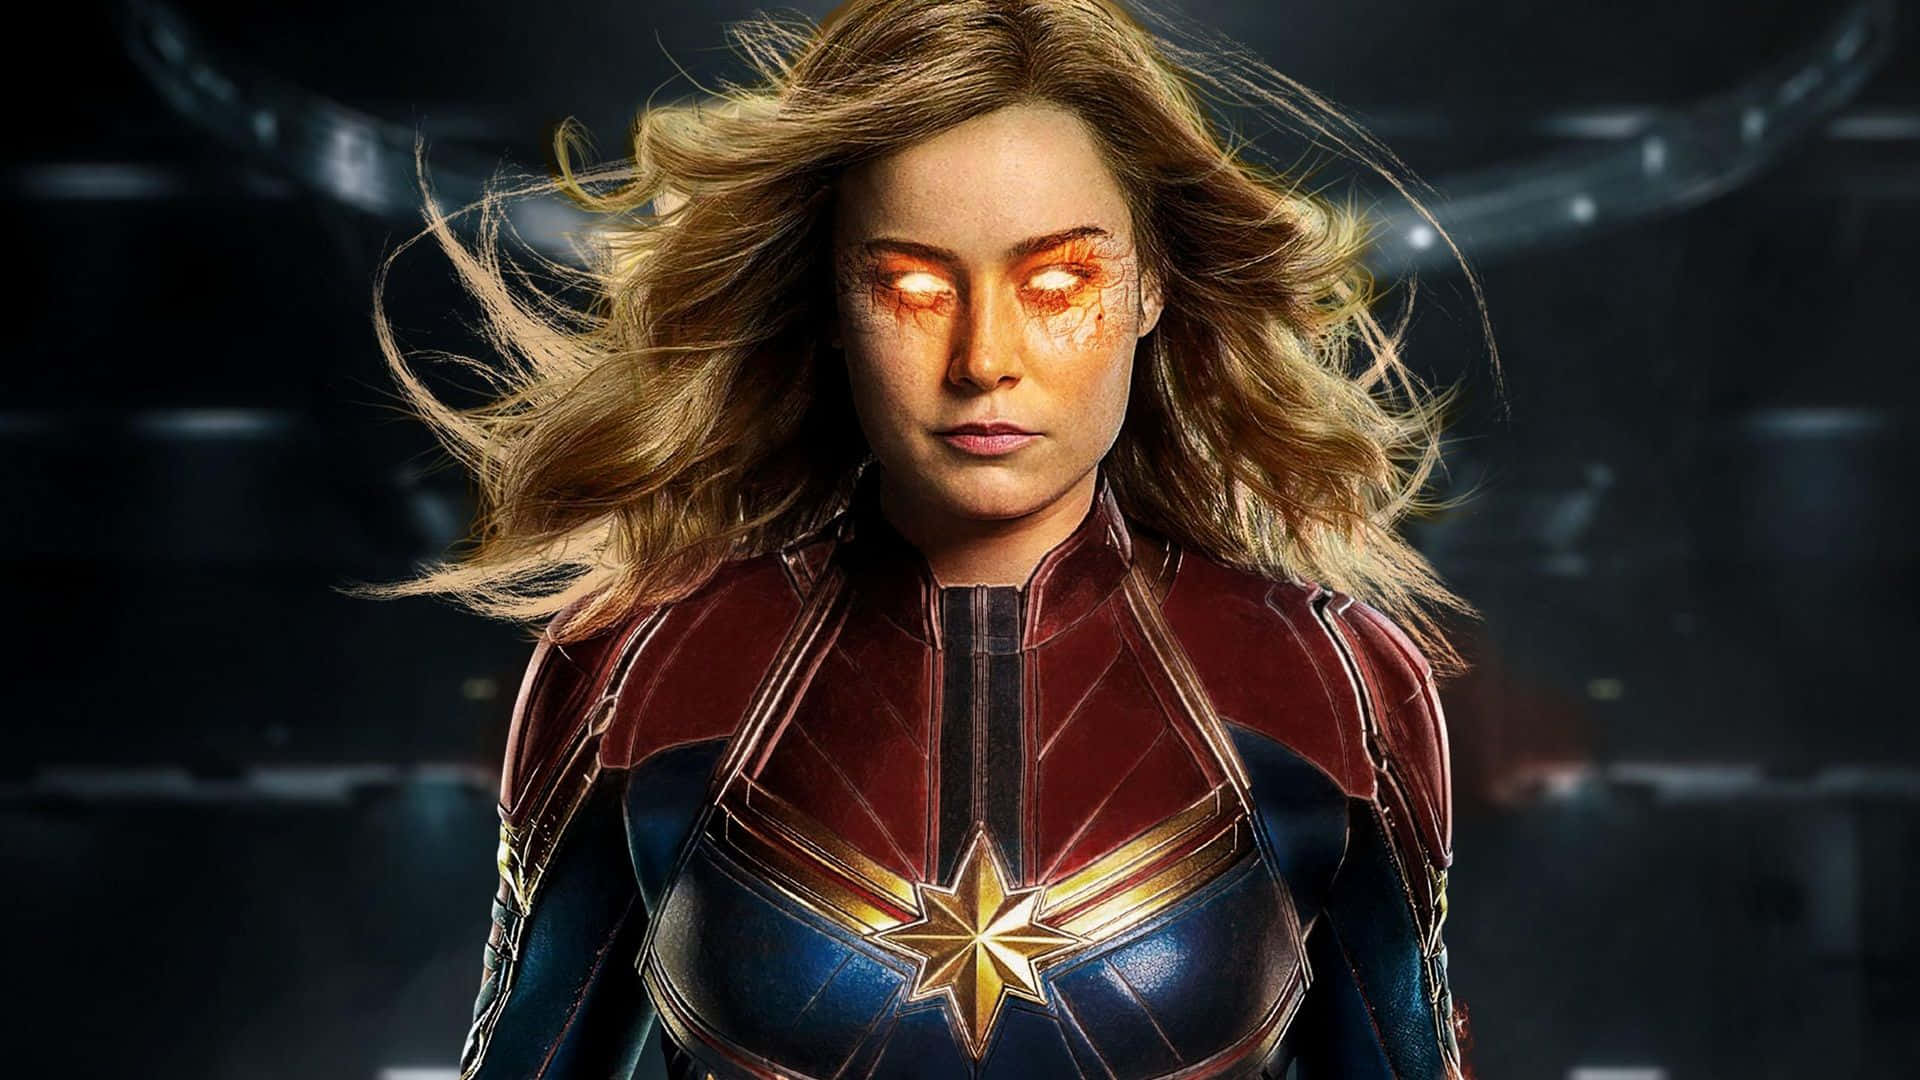 Rise and shine star power, Captain Marvel is here.